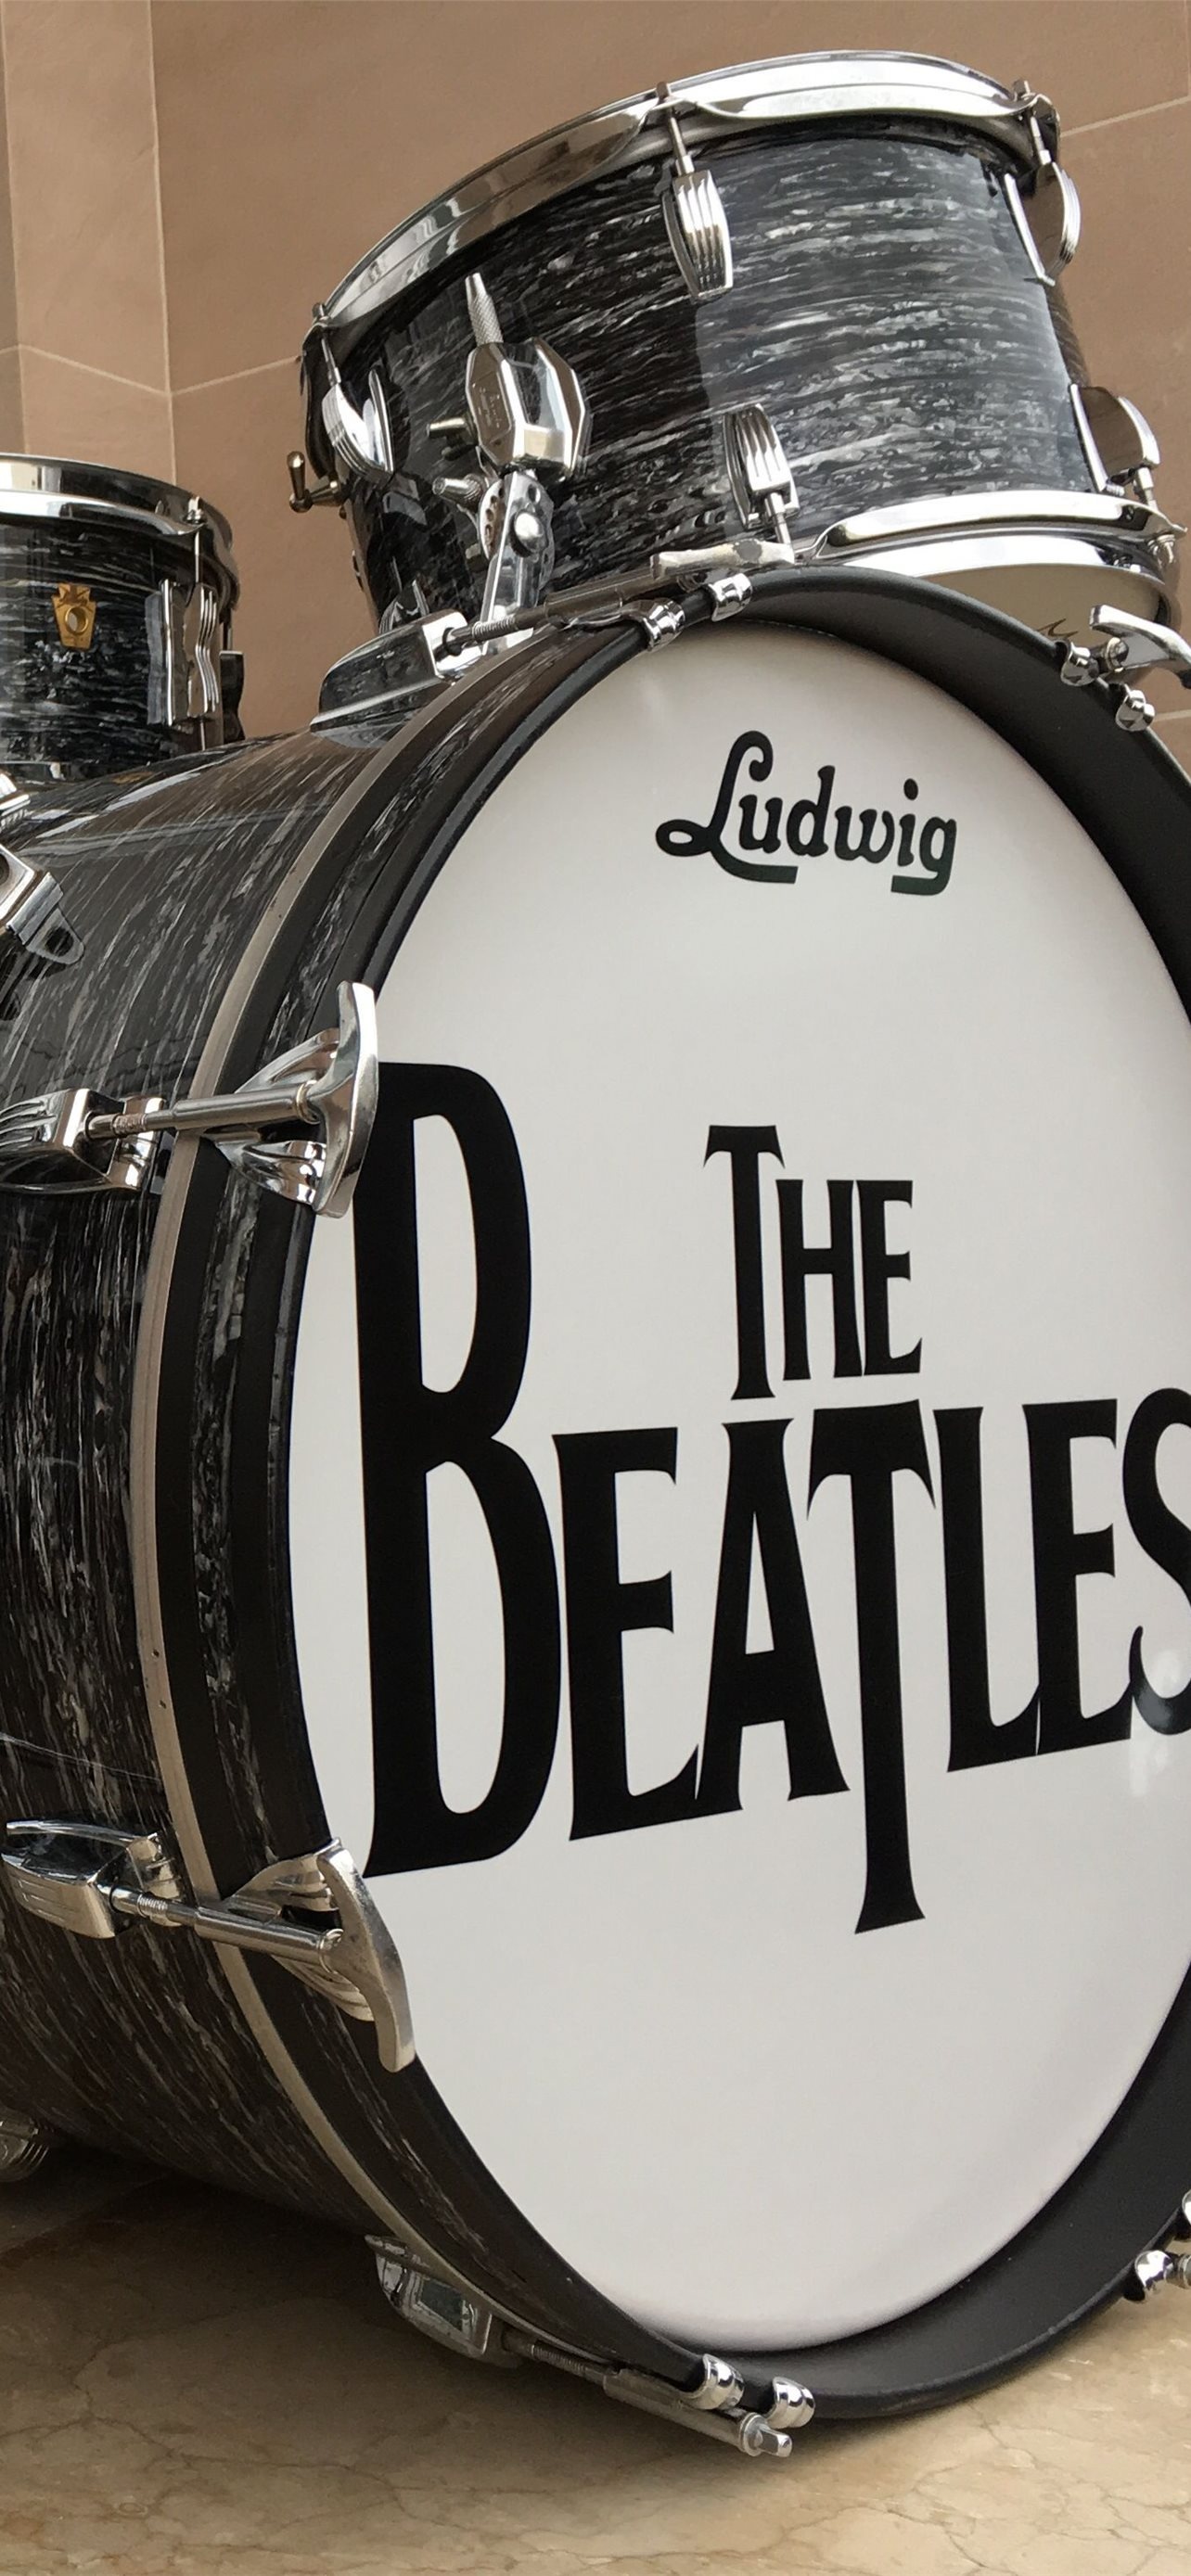 Bass Drum: Ludwig Drums, A United States percussion instrument manufacturer, The Beatles drummer Ringo Starr. 1290x2780 HD Background.